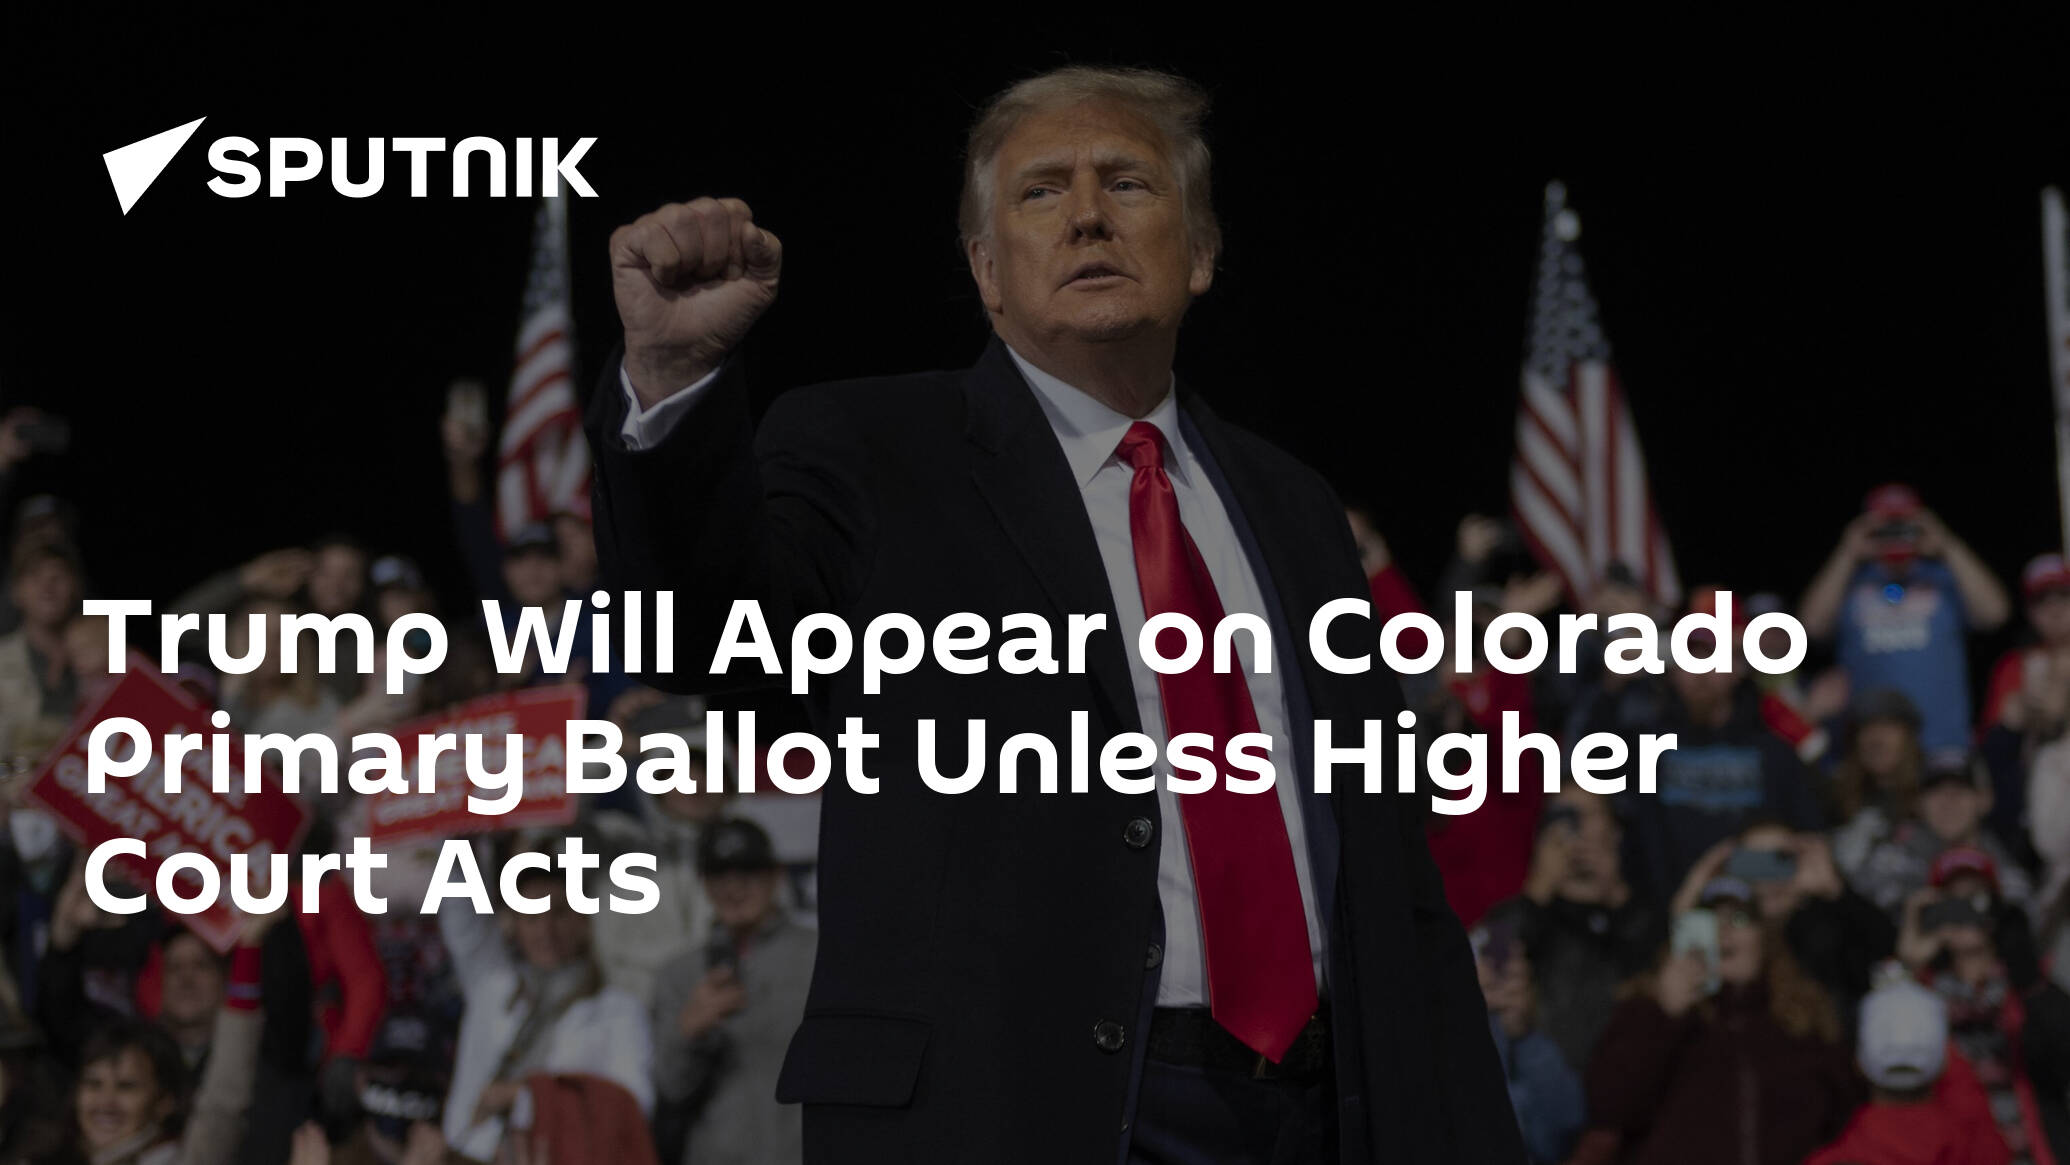 Trump Will Appear on Colorado Primary Ballot Unless Higher Court Acts